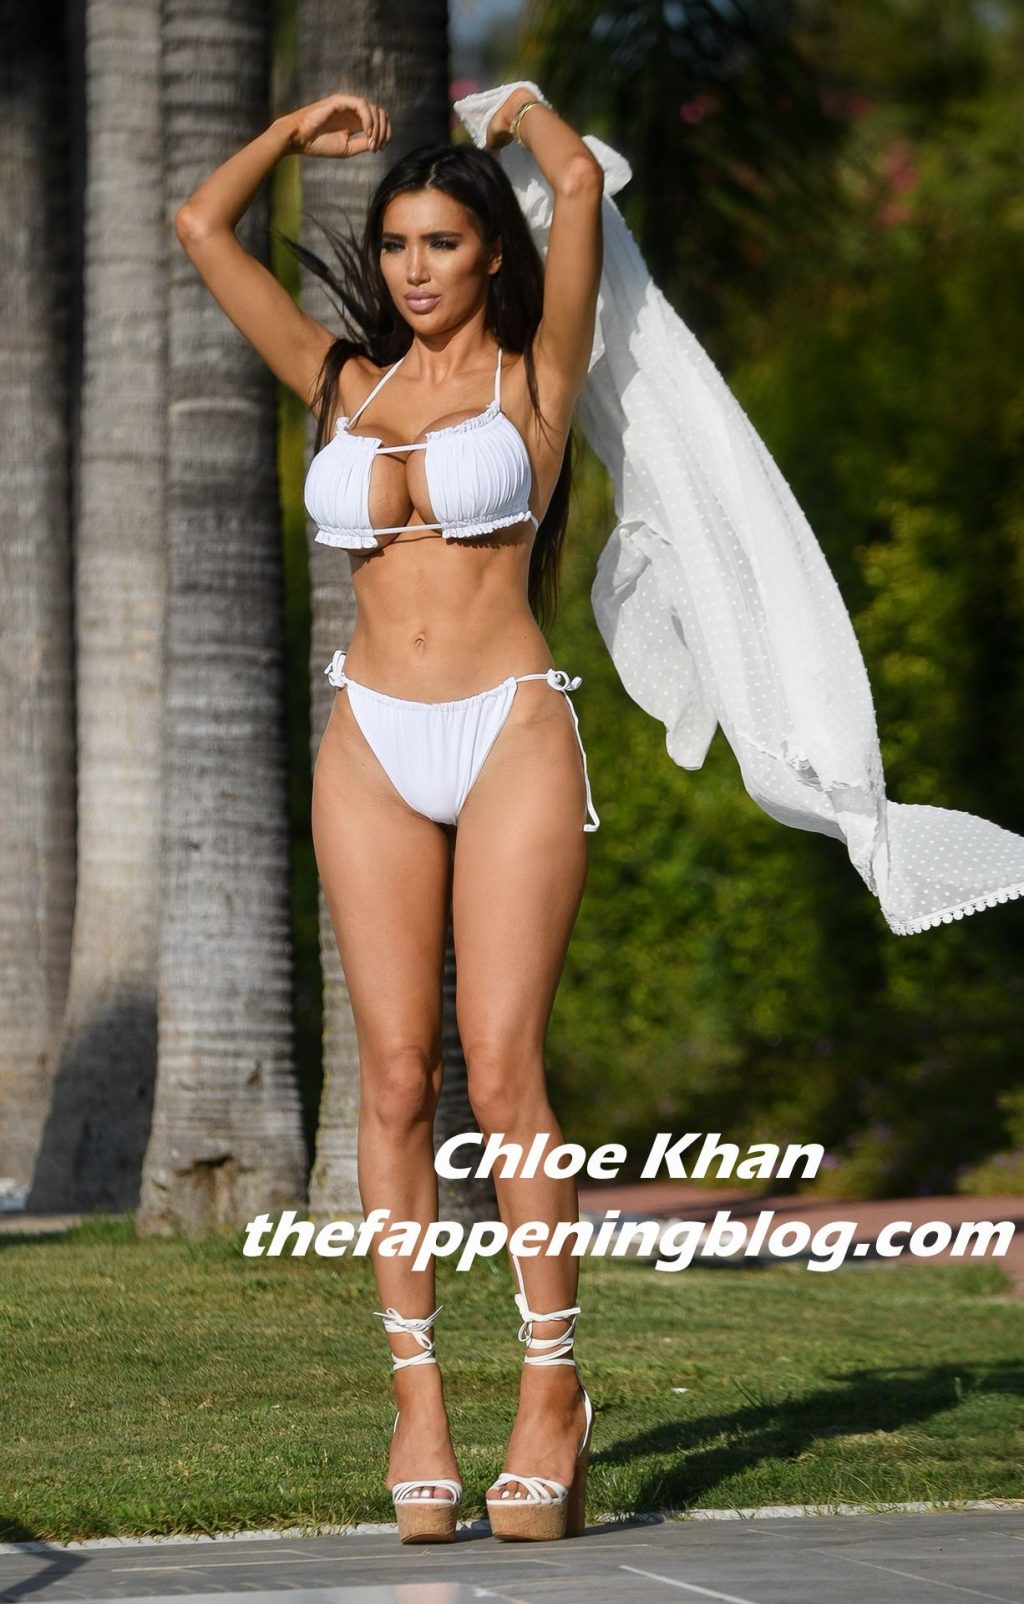 Chloe Khan Is Seen By The Pool In A 5 Star Hotel In Marbella (24 Photos)